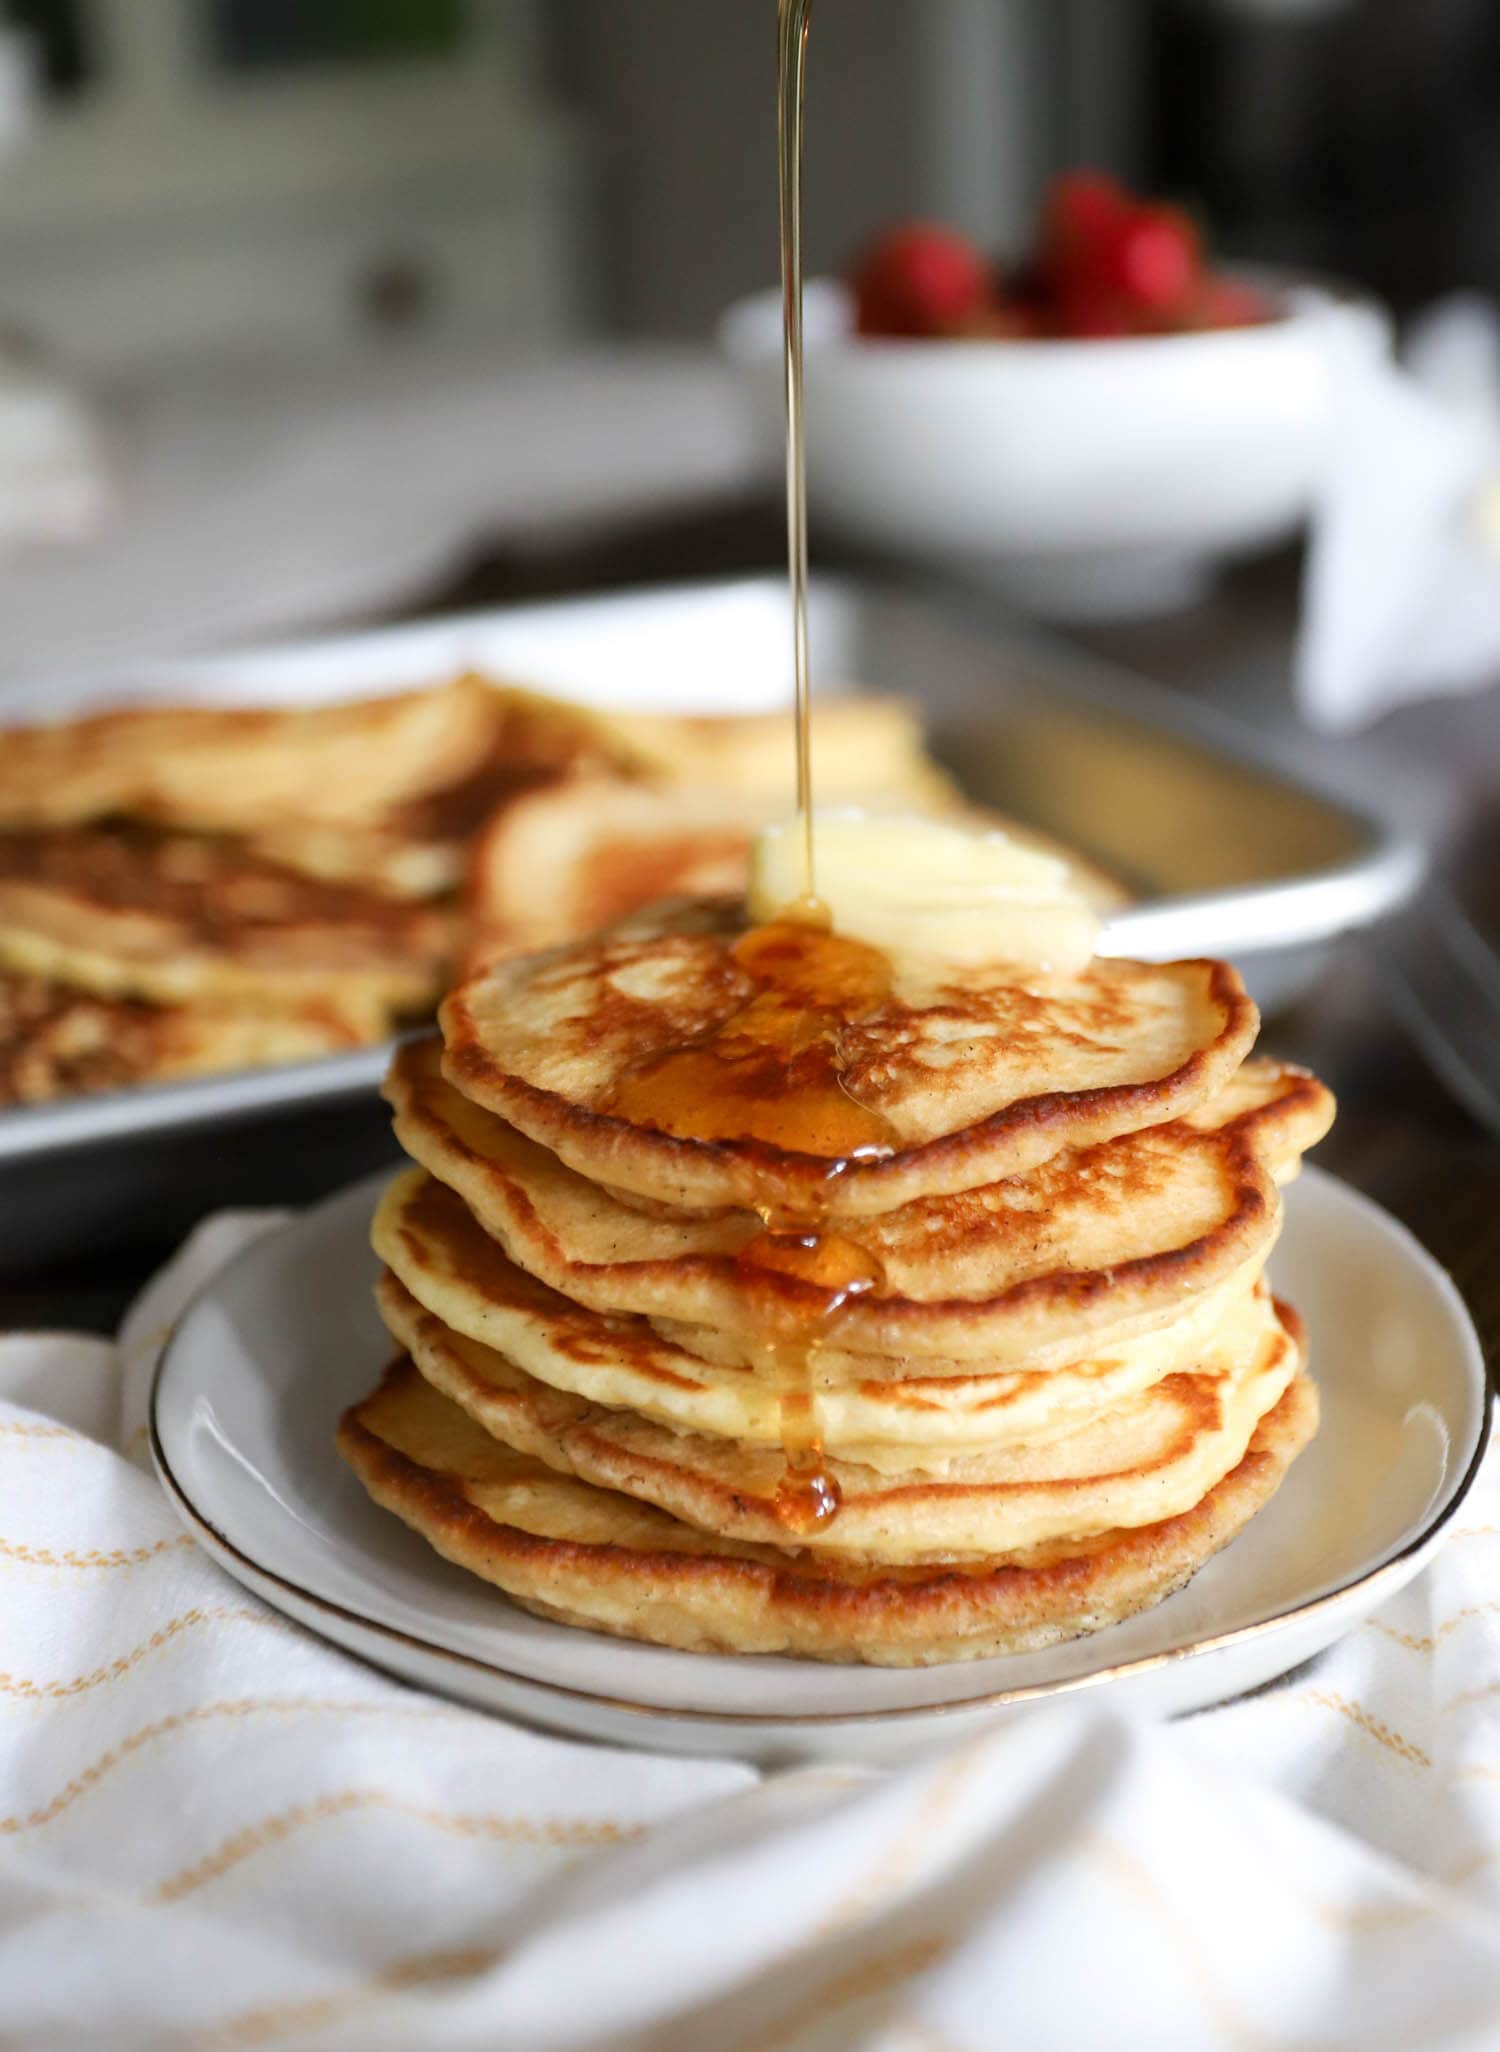 Tall stack of pancakes with stream of syrup being poured over top.